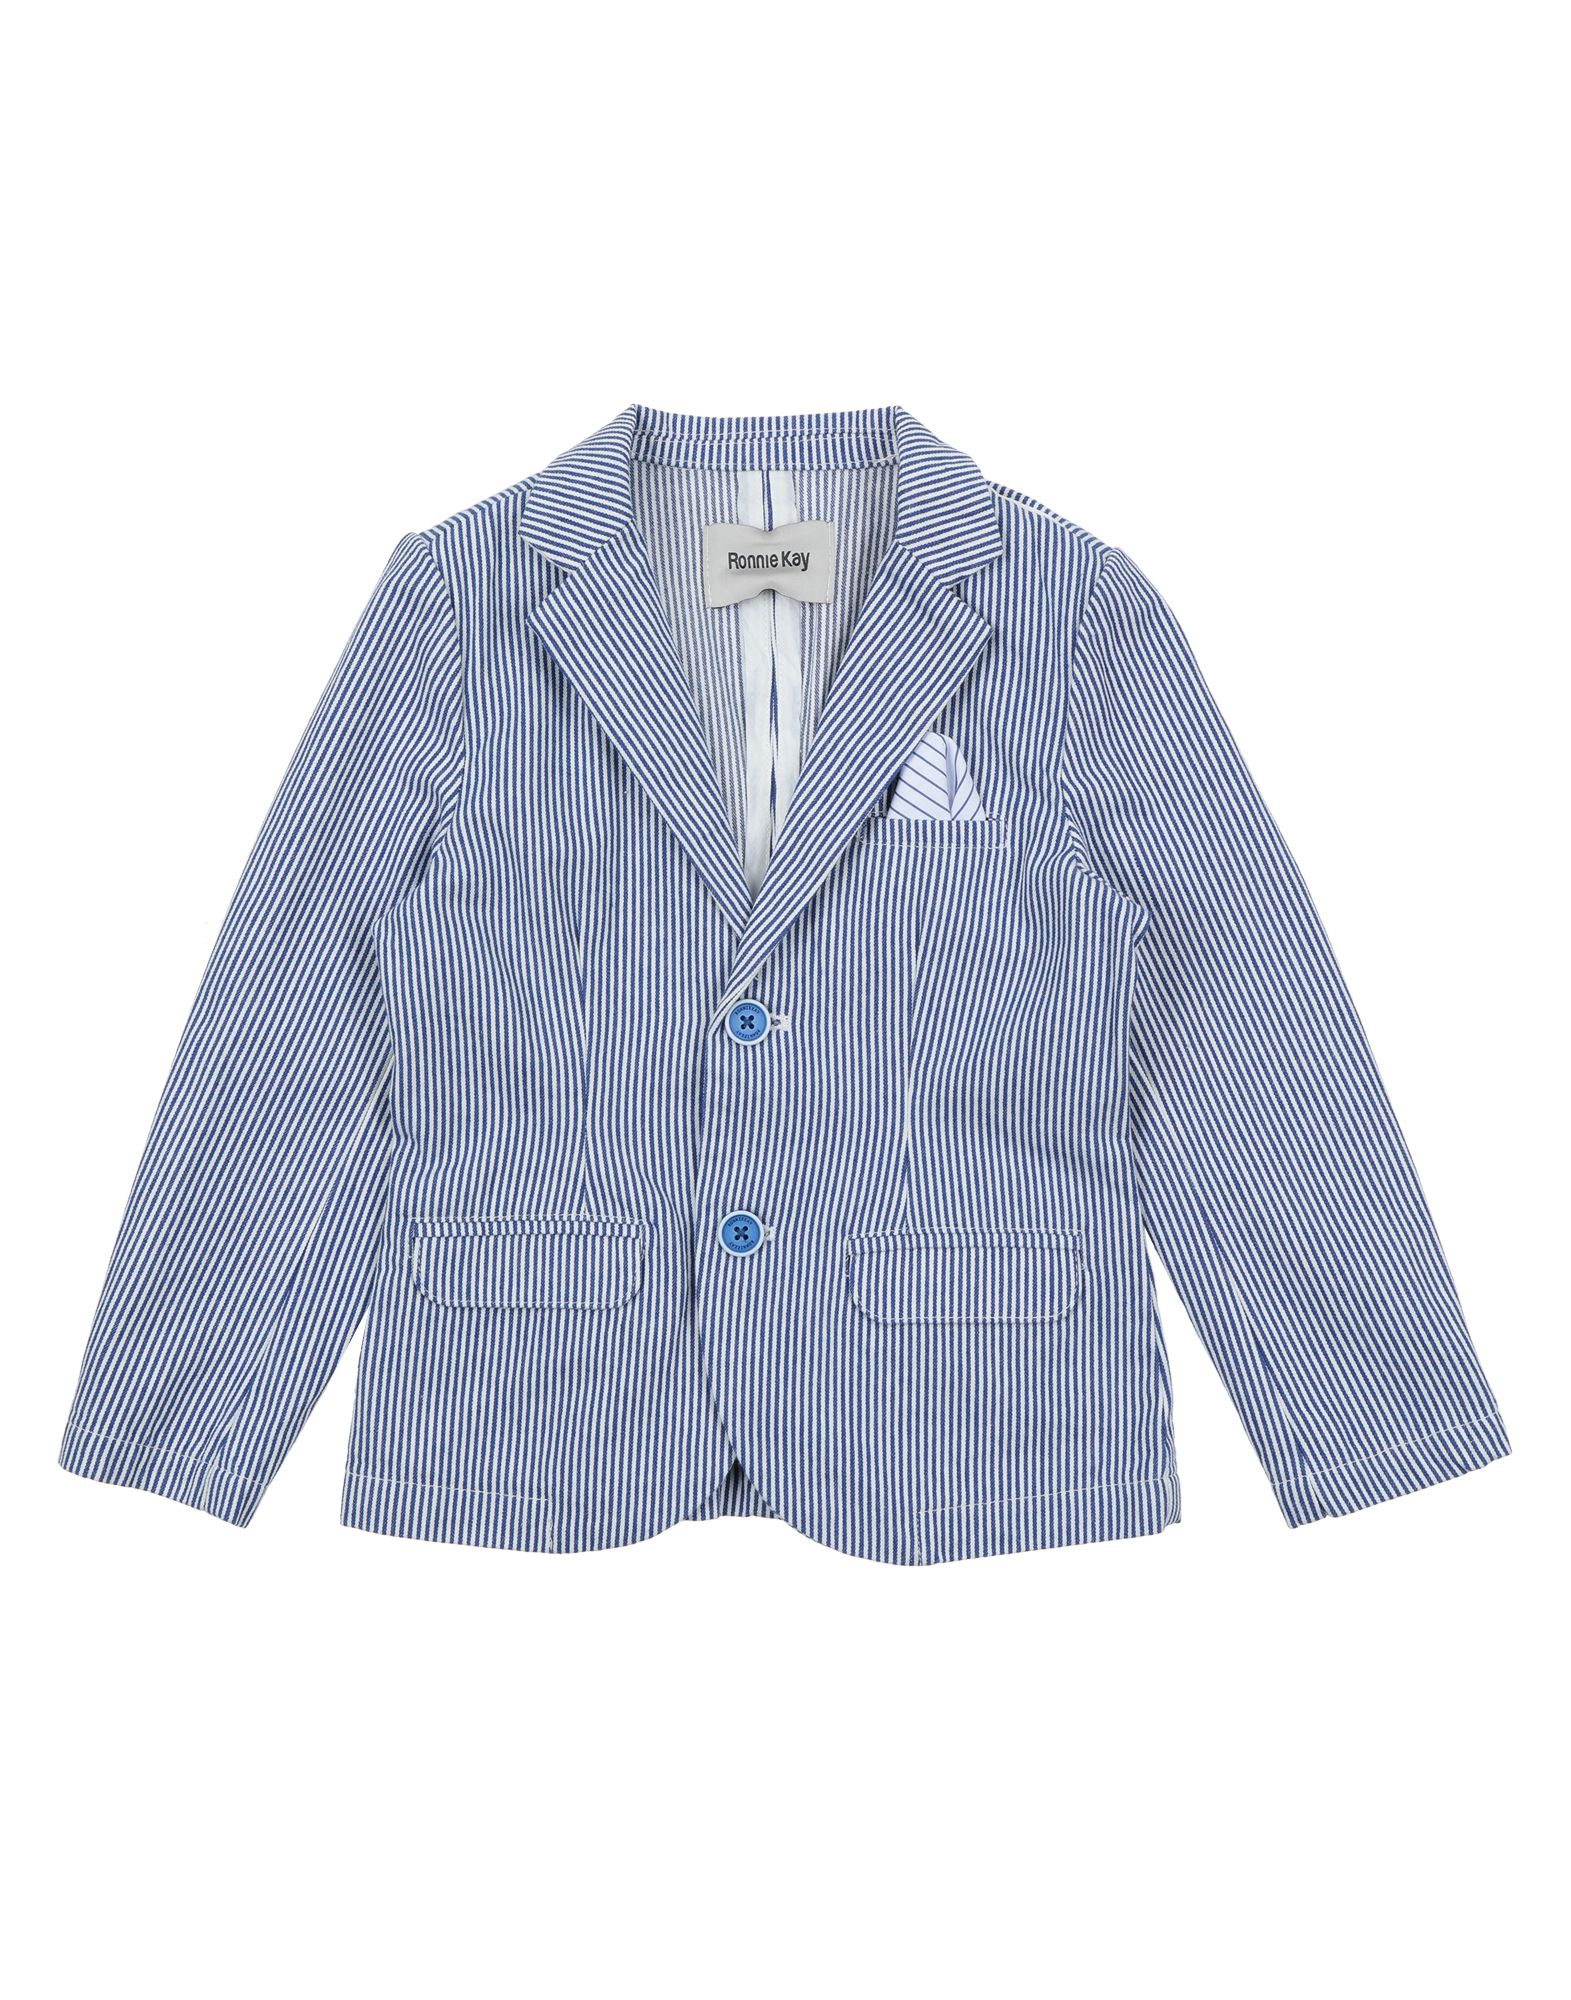 Ronnie Kay Kids' Suit Jackets In Blue